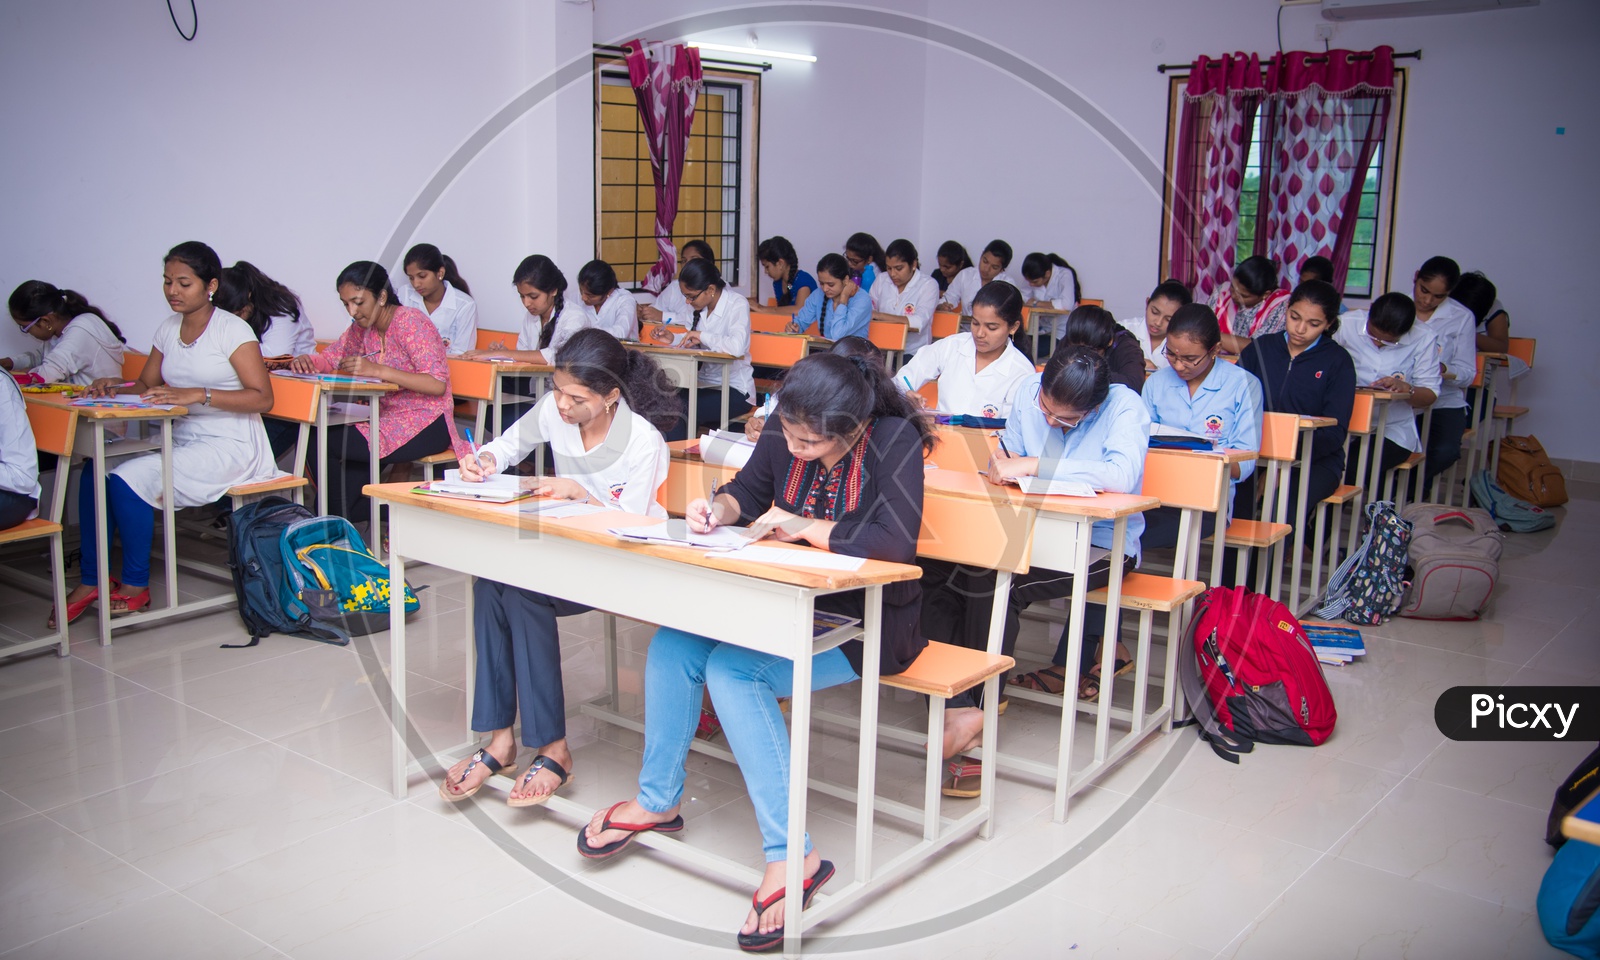 Students in an examination hall in at an educational institute in Telangana